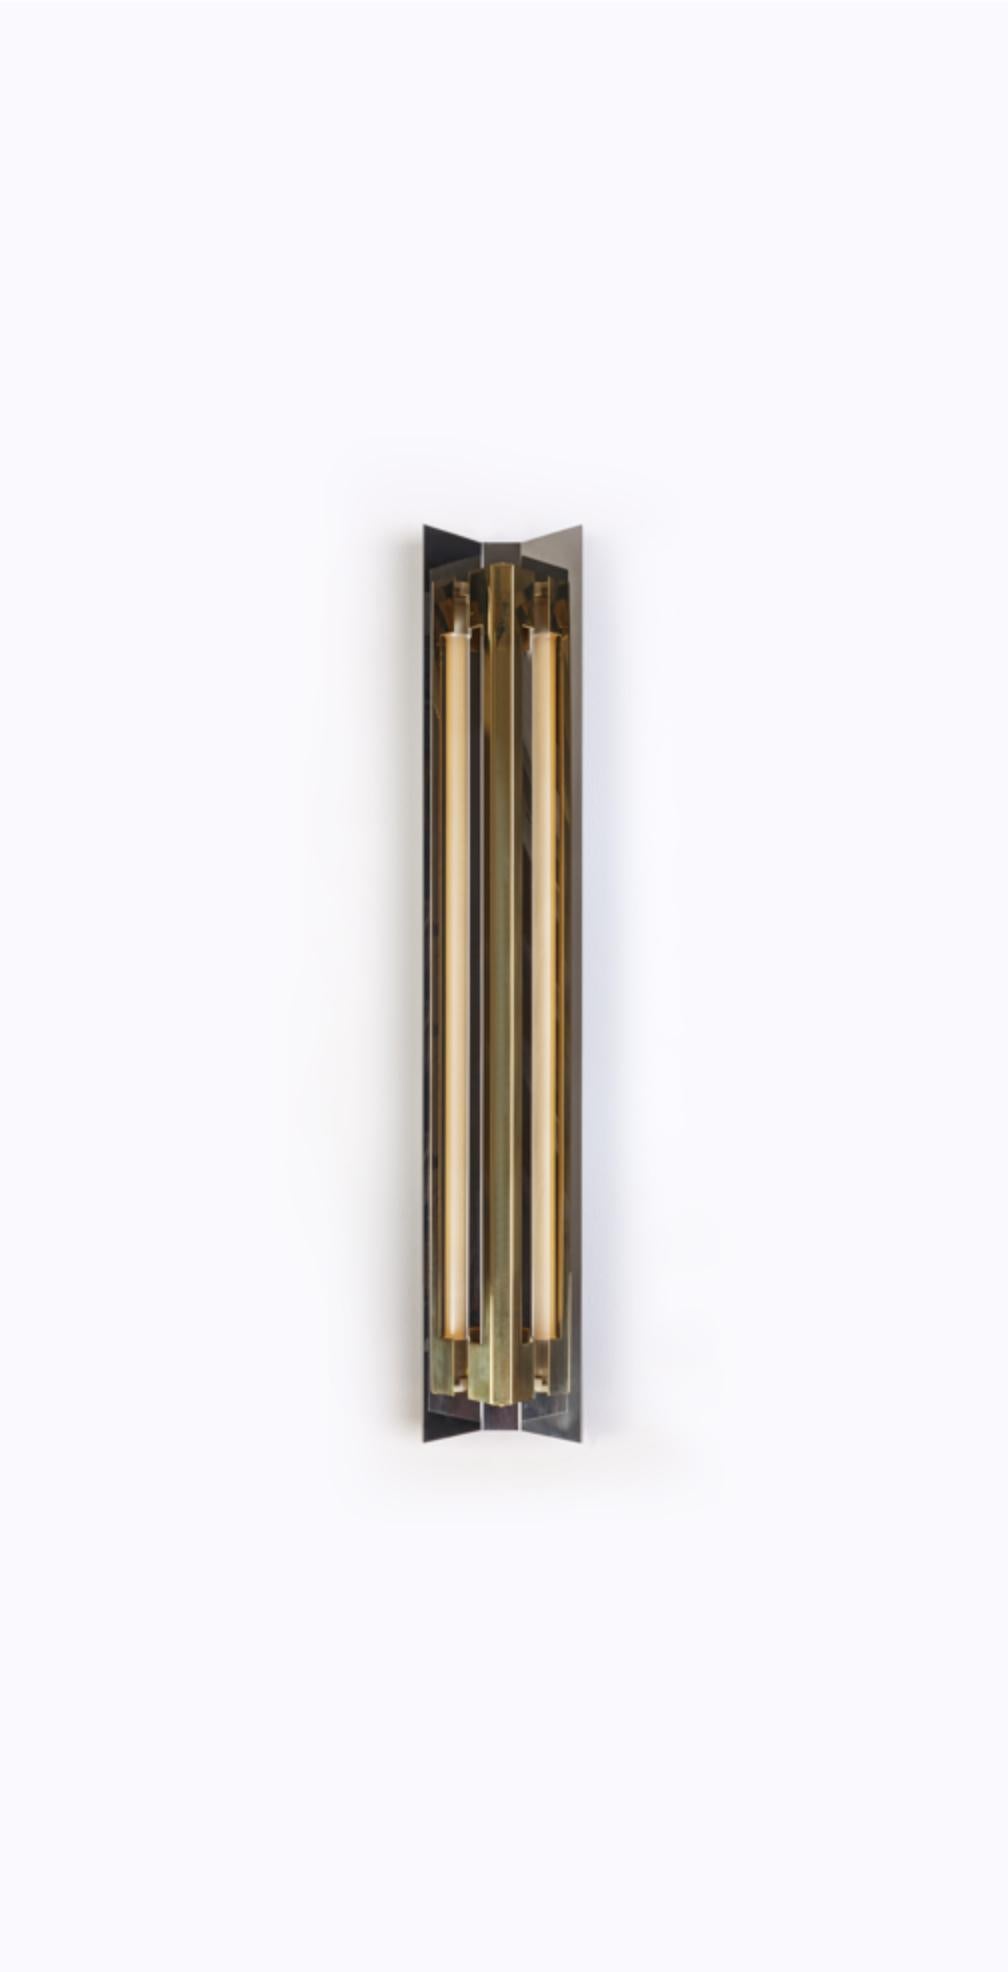 Large Misalliance Solid Brass Wall Light by Lexavala
Dimensions: D 16 x W 130 x H 8 cm
Materials: Brass.

There are two lenghts of socket covers, extending over the LED. Two short are to be found in Suspended and Surface, and one long in the